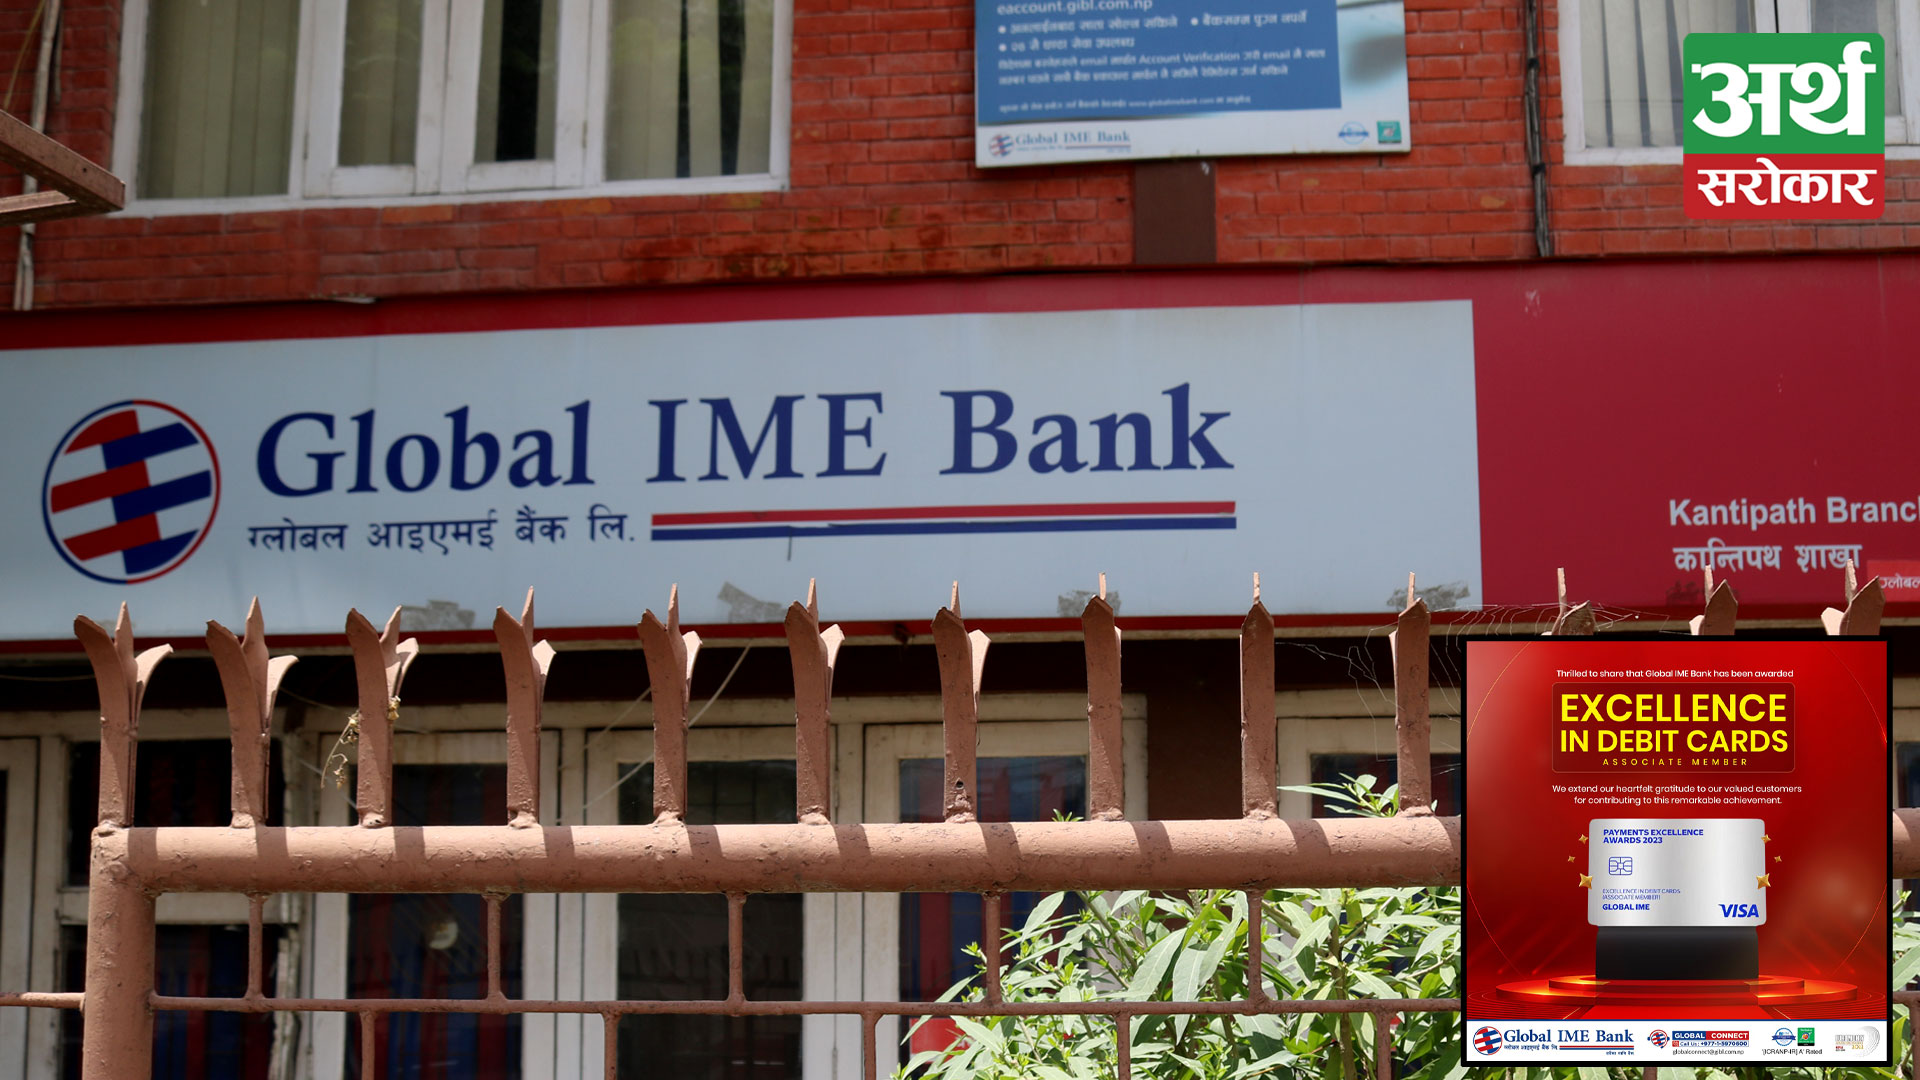 Global IME Bank bags payments excellence awards